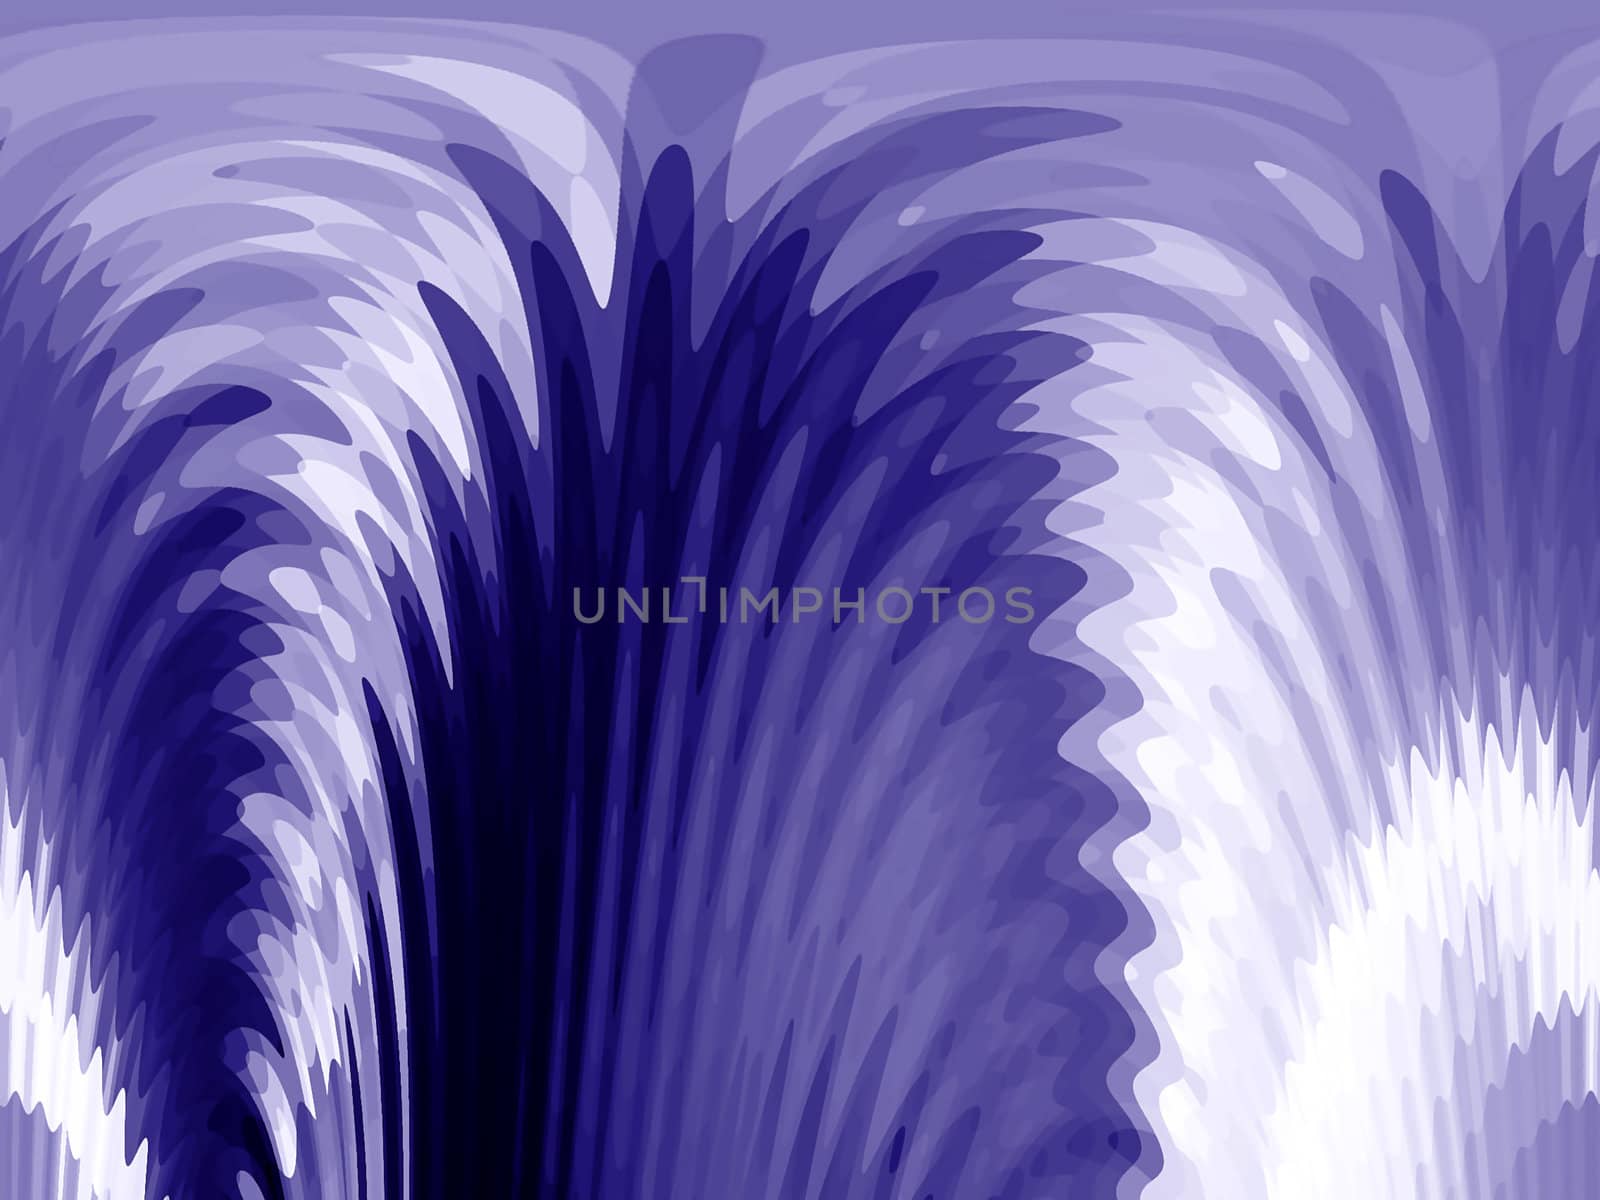 blue wave illustration abstract background image